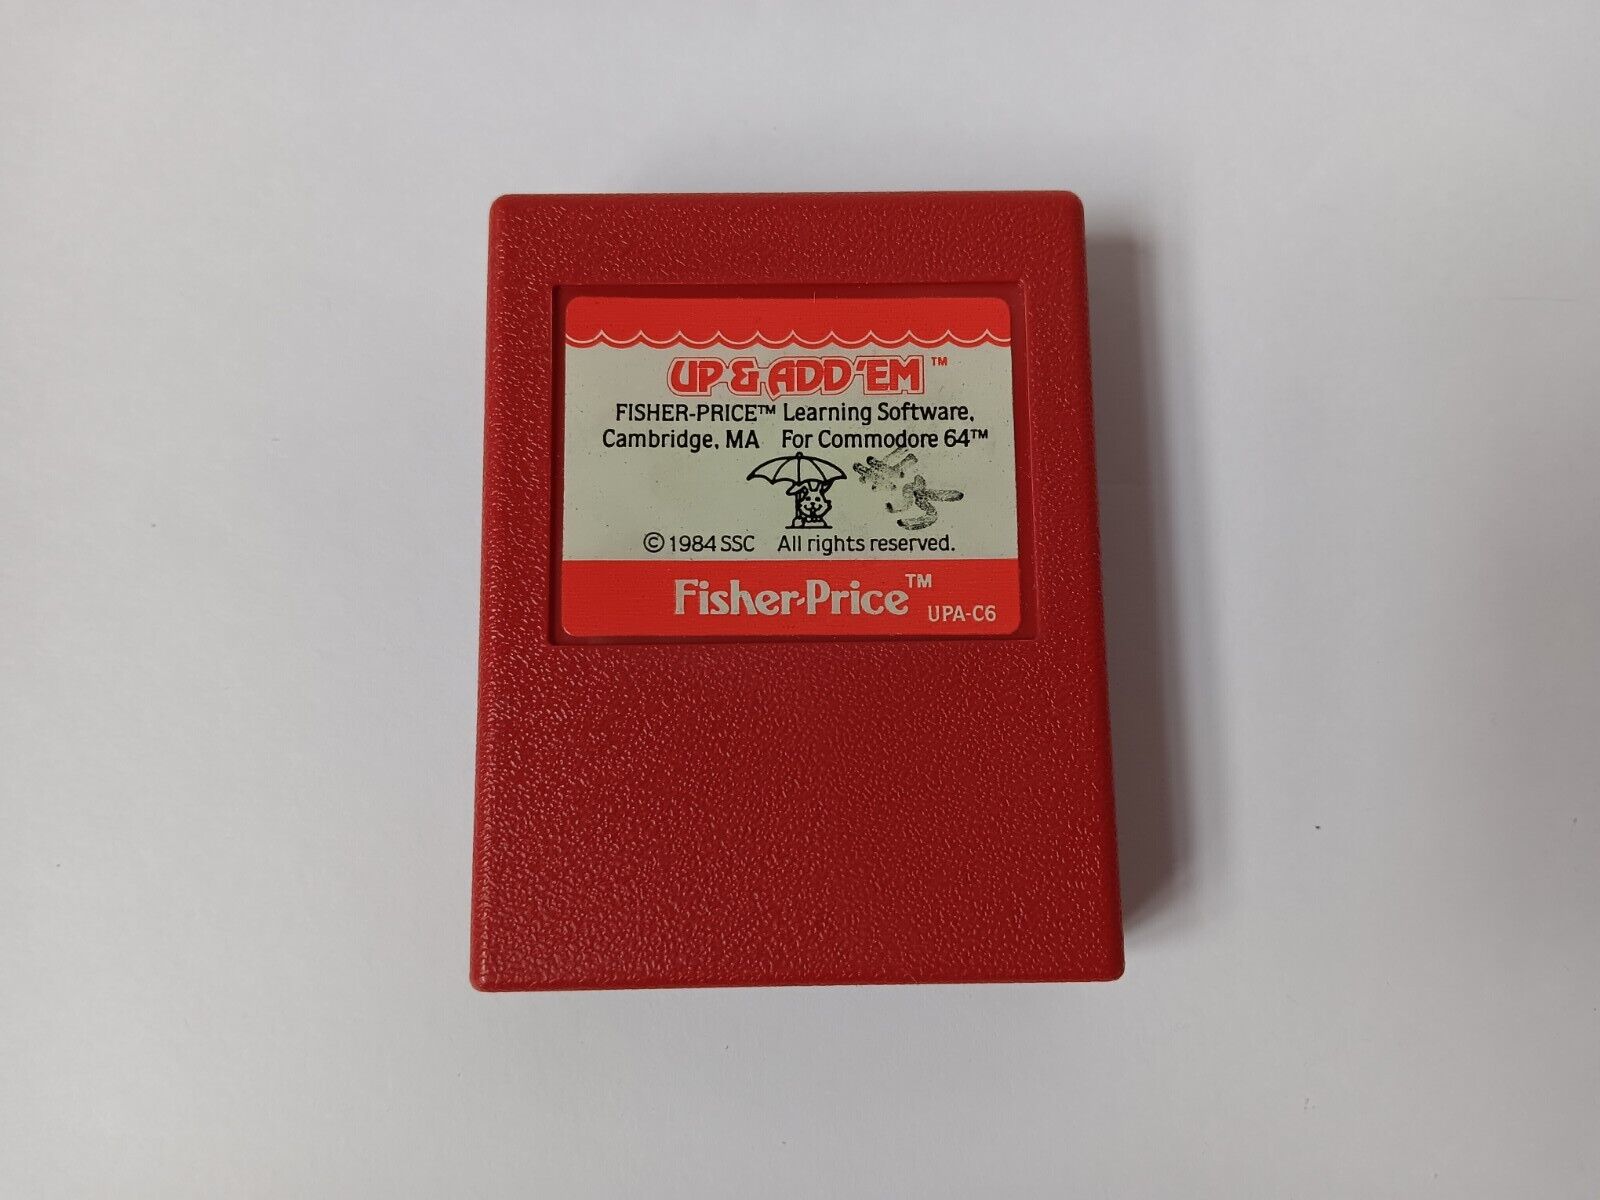 VTG Commodore 64 Up & Add Em Fisher Price Computer Game Cartridge Tested/Works